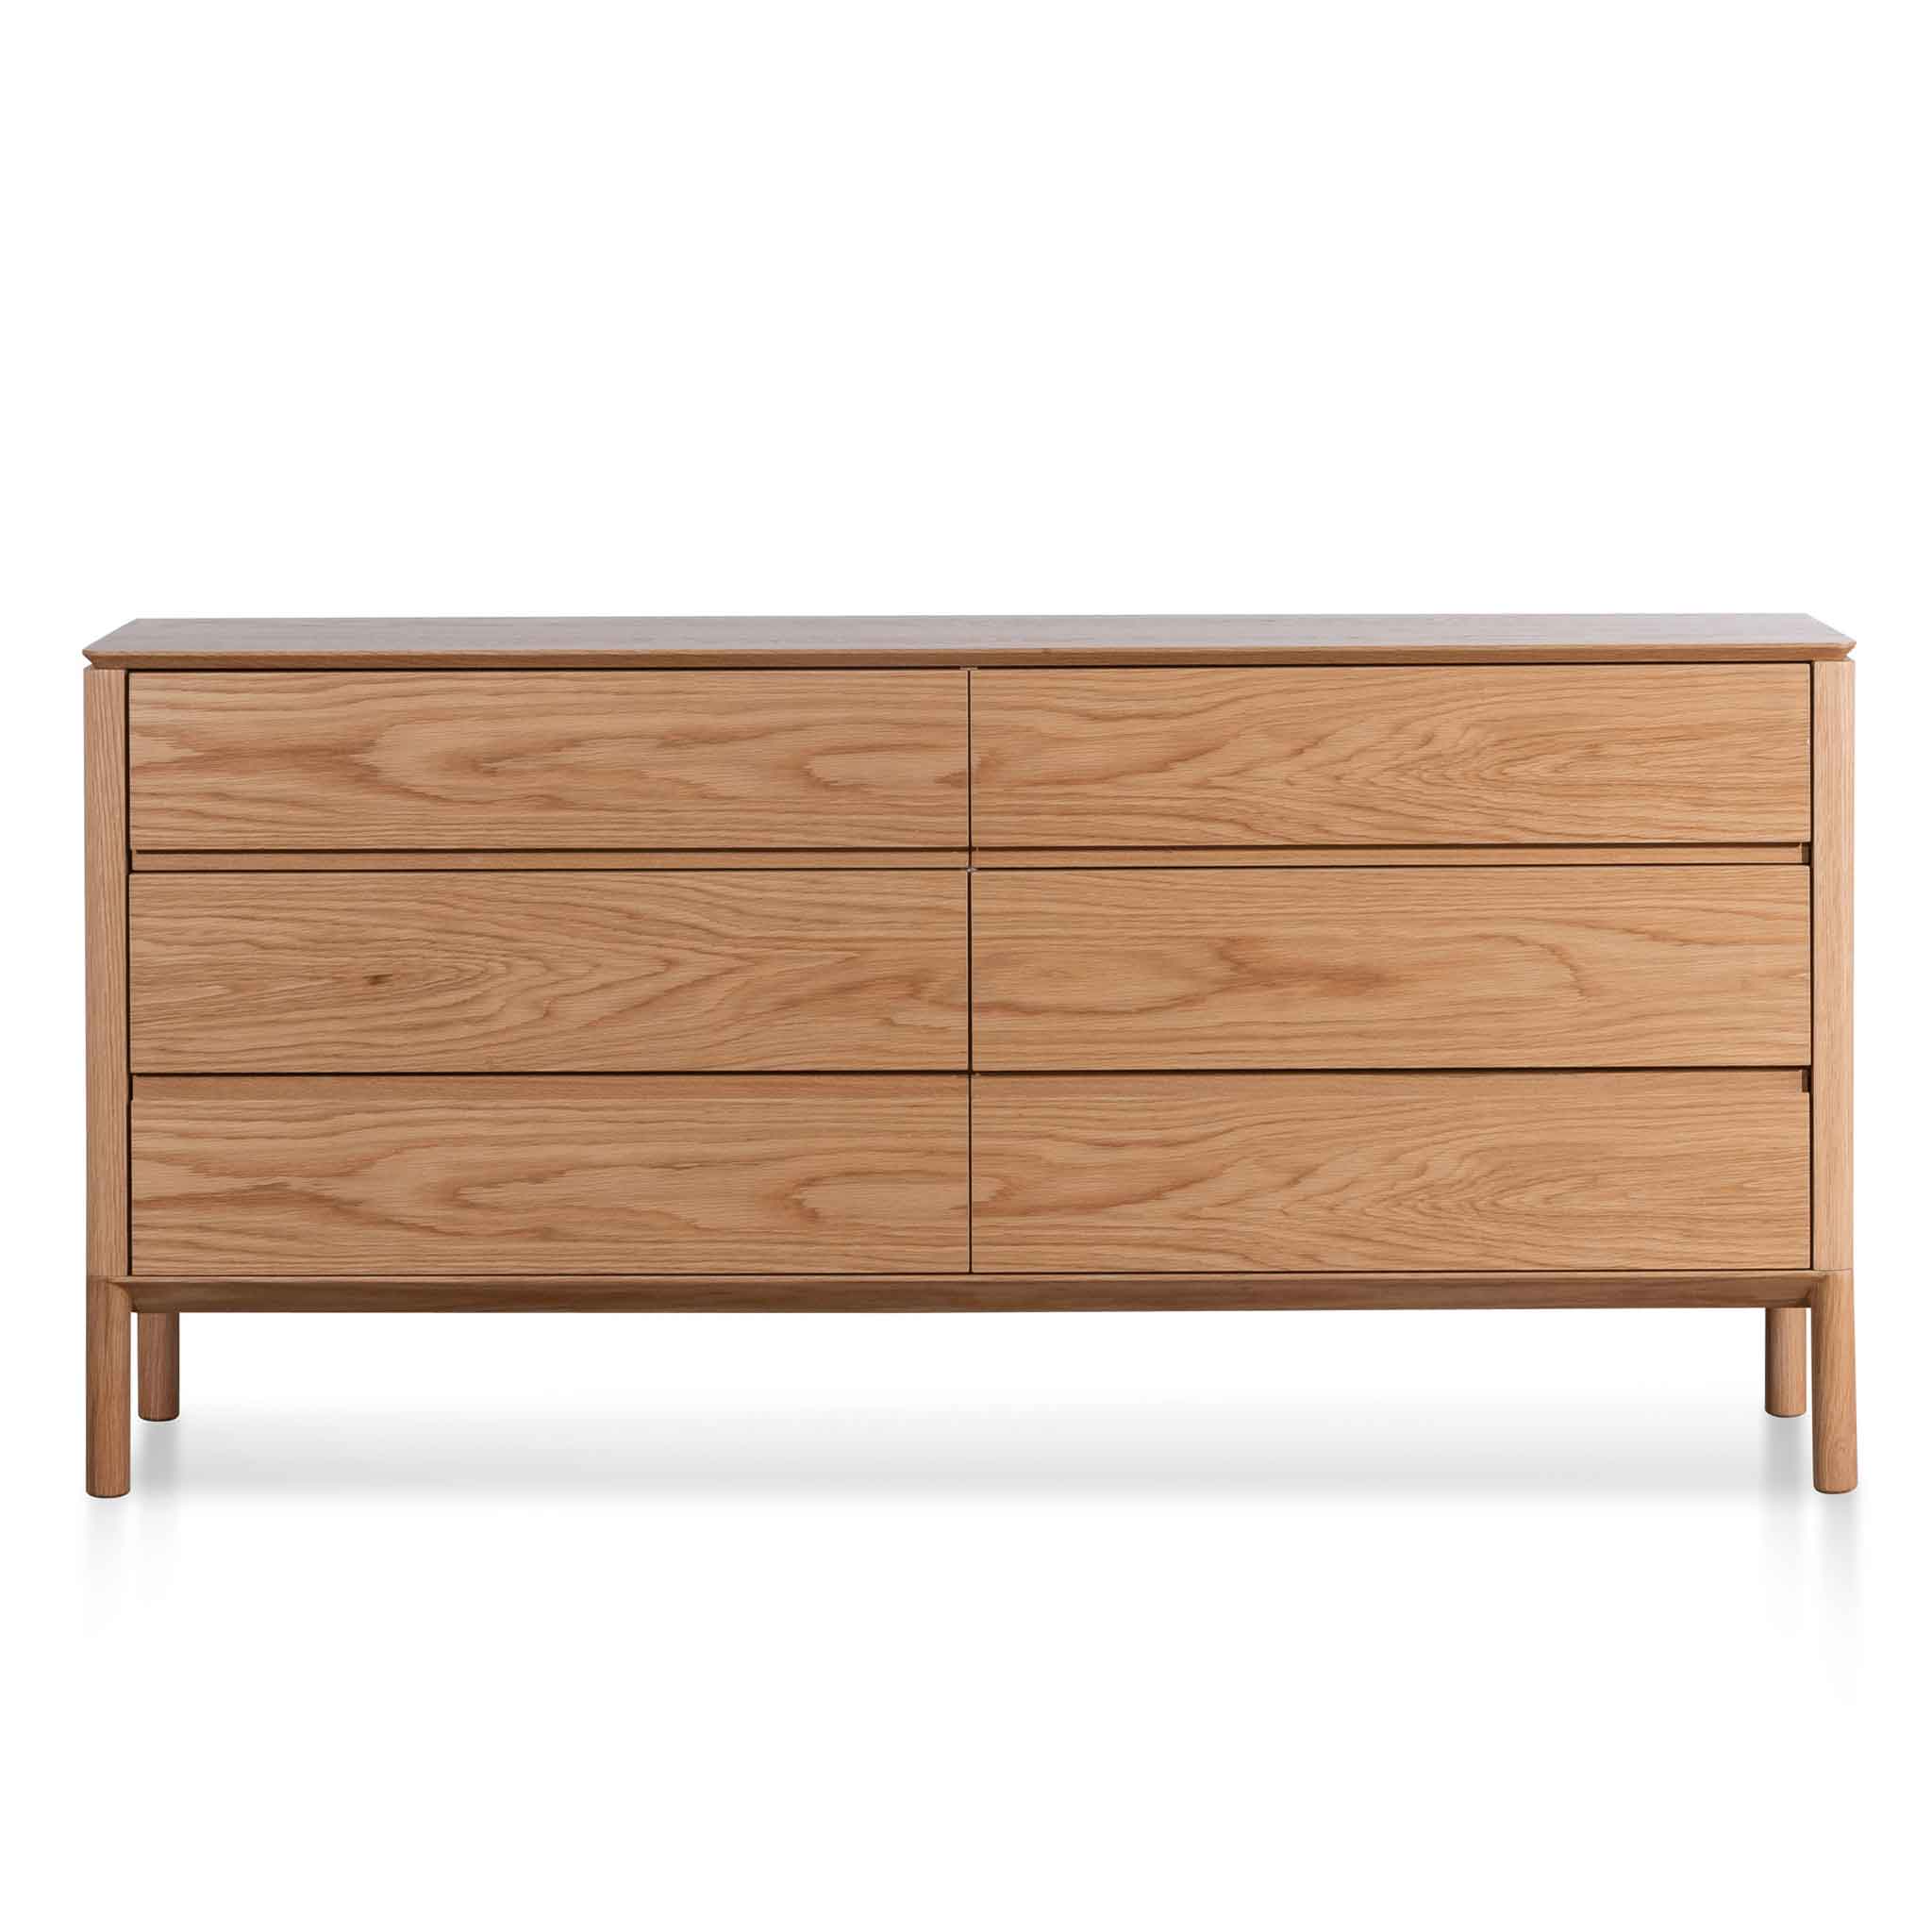 Owen 6 Drawers Wooden Chest - Natural - Dressers